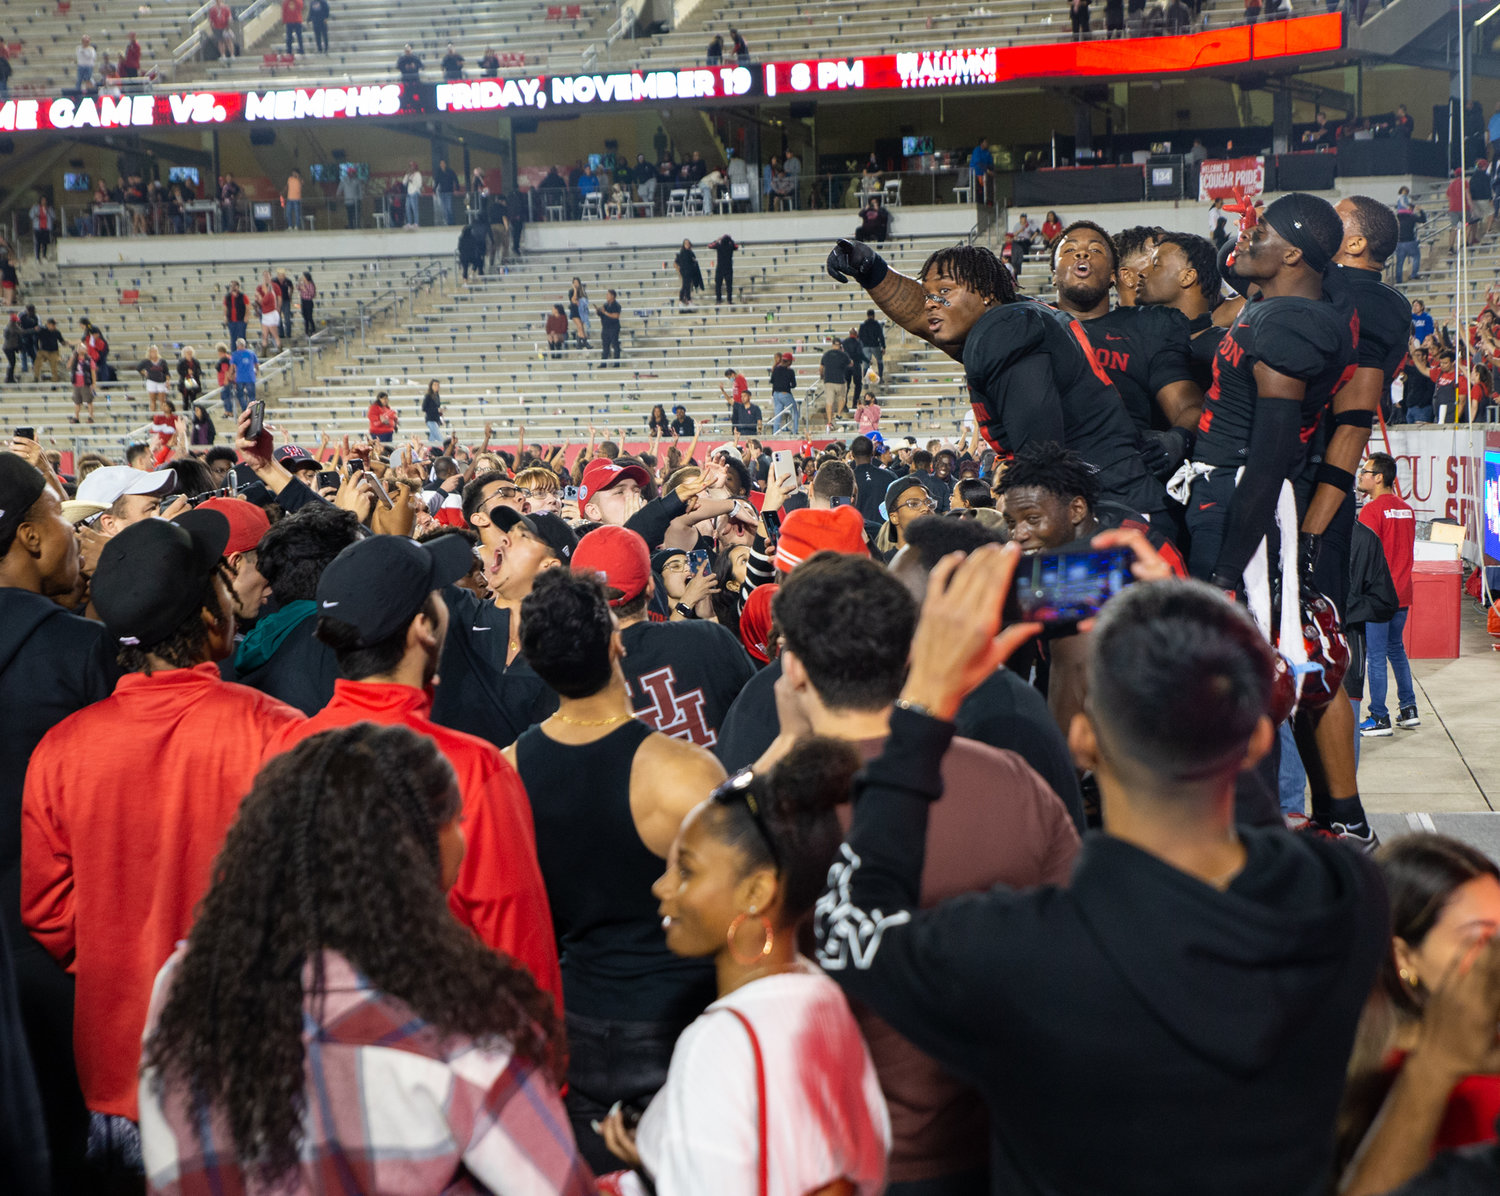 A group of Houston Cougars players celebrate on the field with fans after a 44-37 win over rival SMU in an NCAA football game on October 30, 2021 in Houston, Texas.